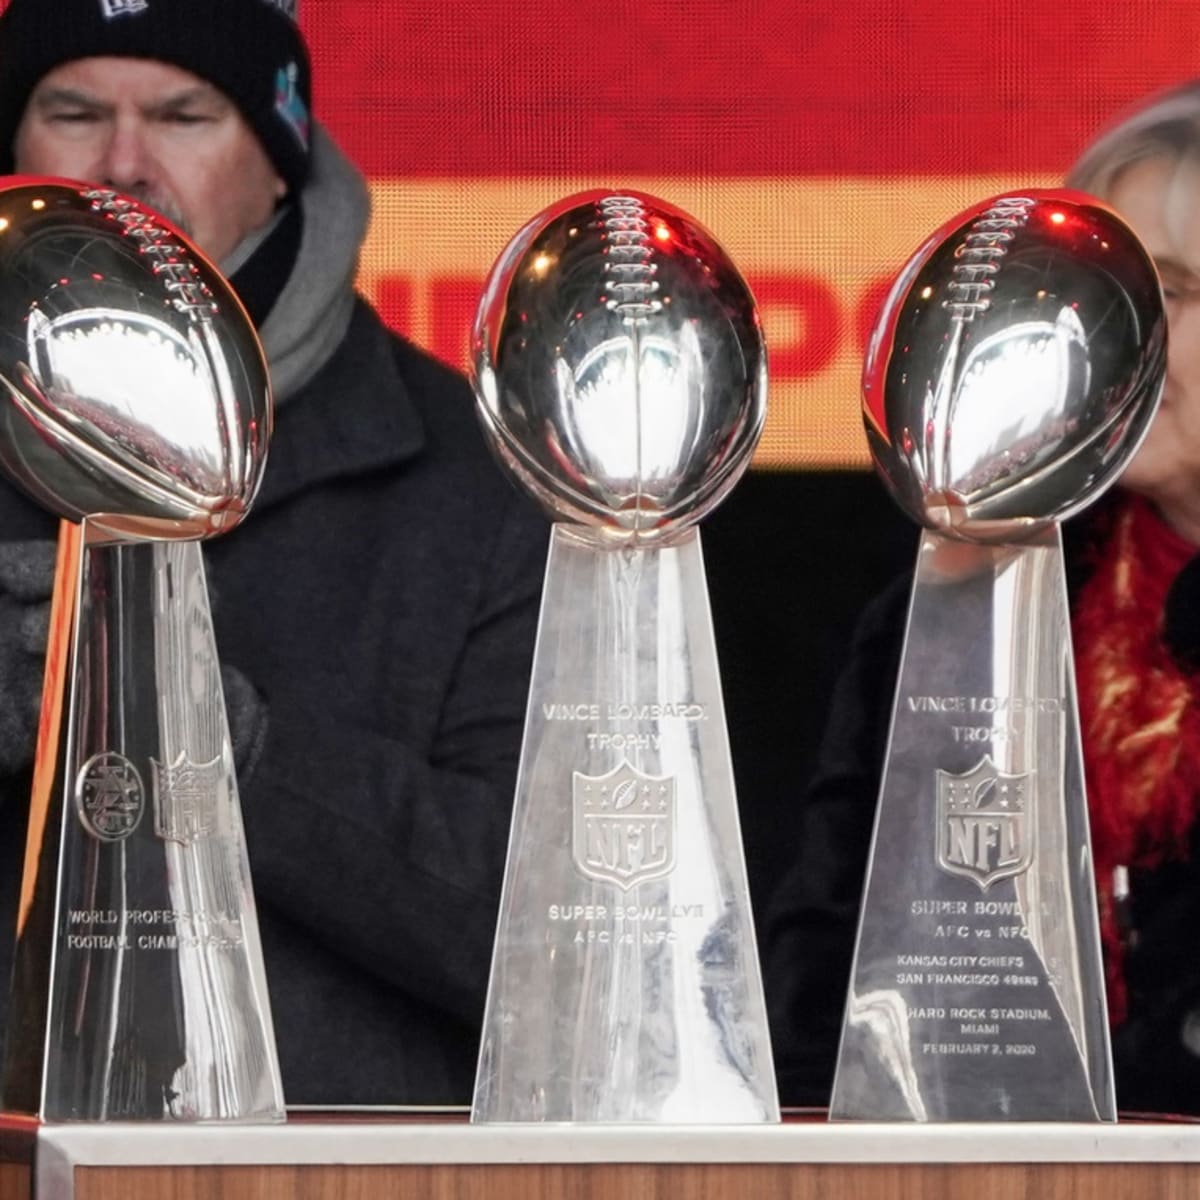 KC Chiefs Super Bowl LVII: Sports Illustrated Commemorative Issue - Sports  Illustrated Kansas City Chiefs News, Analysis and More